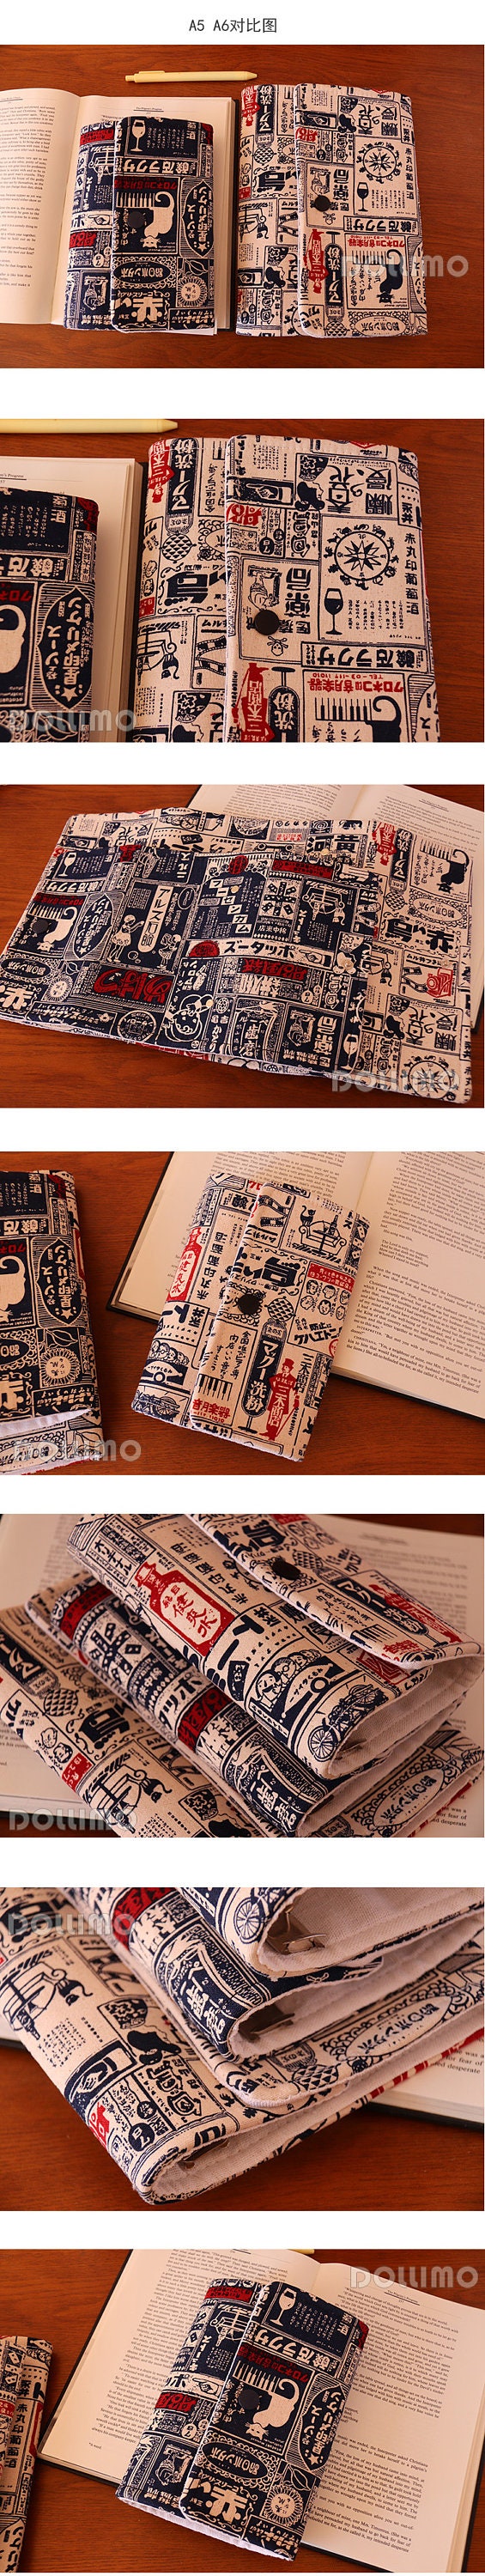 Vantage Cloth Loose-leaf Planner Japanese Old Object Journal Fabric Cover Blank Grid Inner Page Original Retro Travel Diary Notebook A5 A6